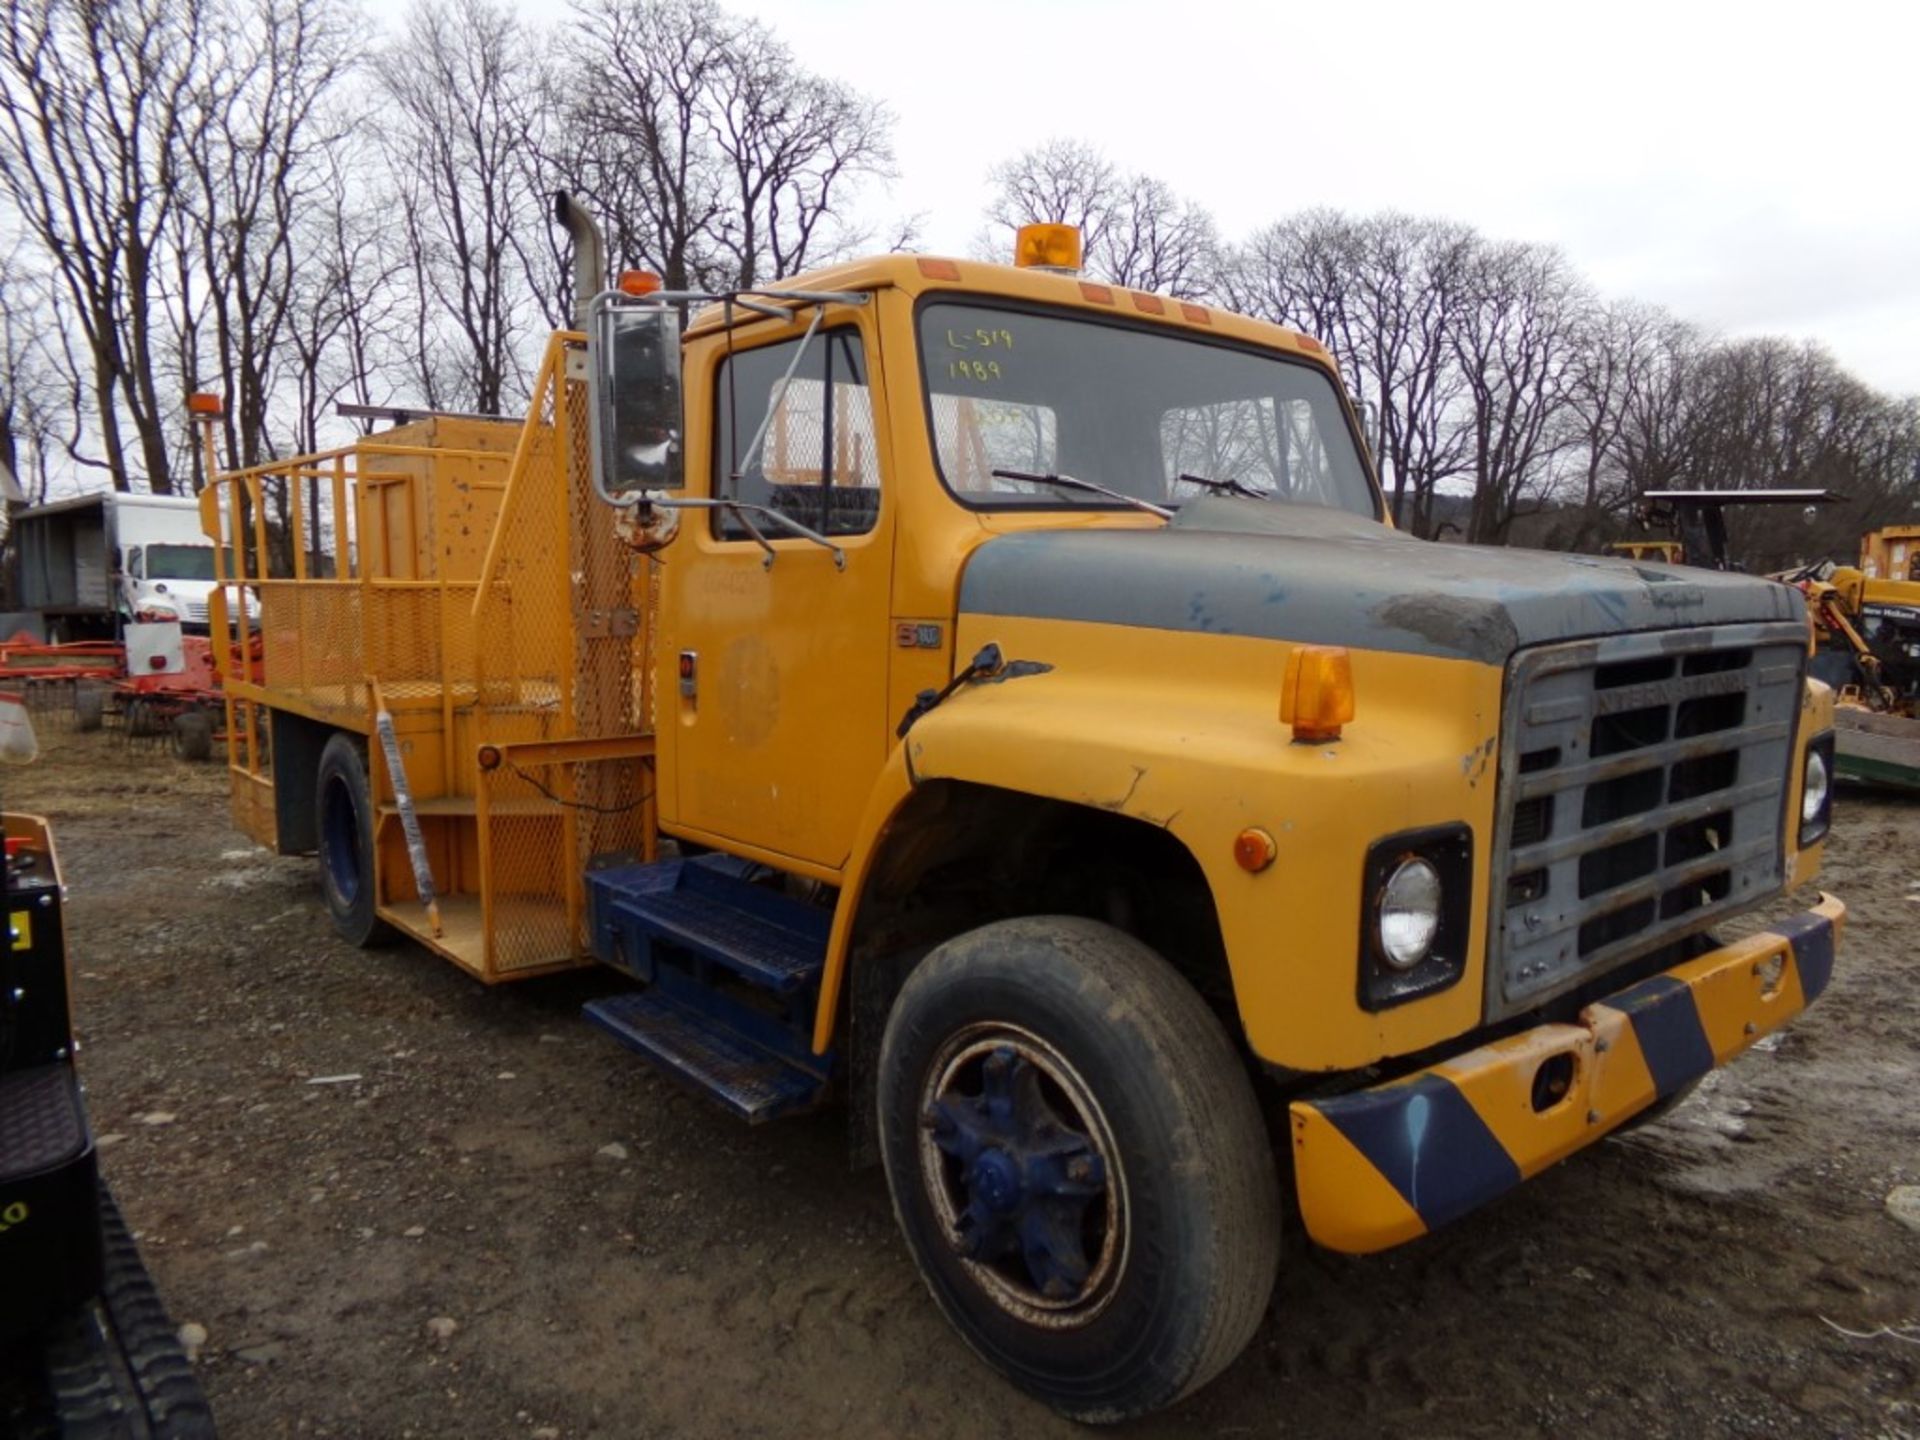 1989 International S-1600 Reg Cab, Utility Truck, 120,272 Miles, 5 Speed Manual, Used As Cone Truck, - Image 4 of 13